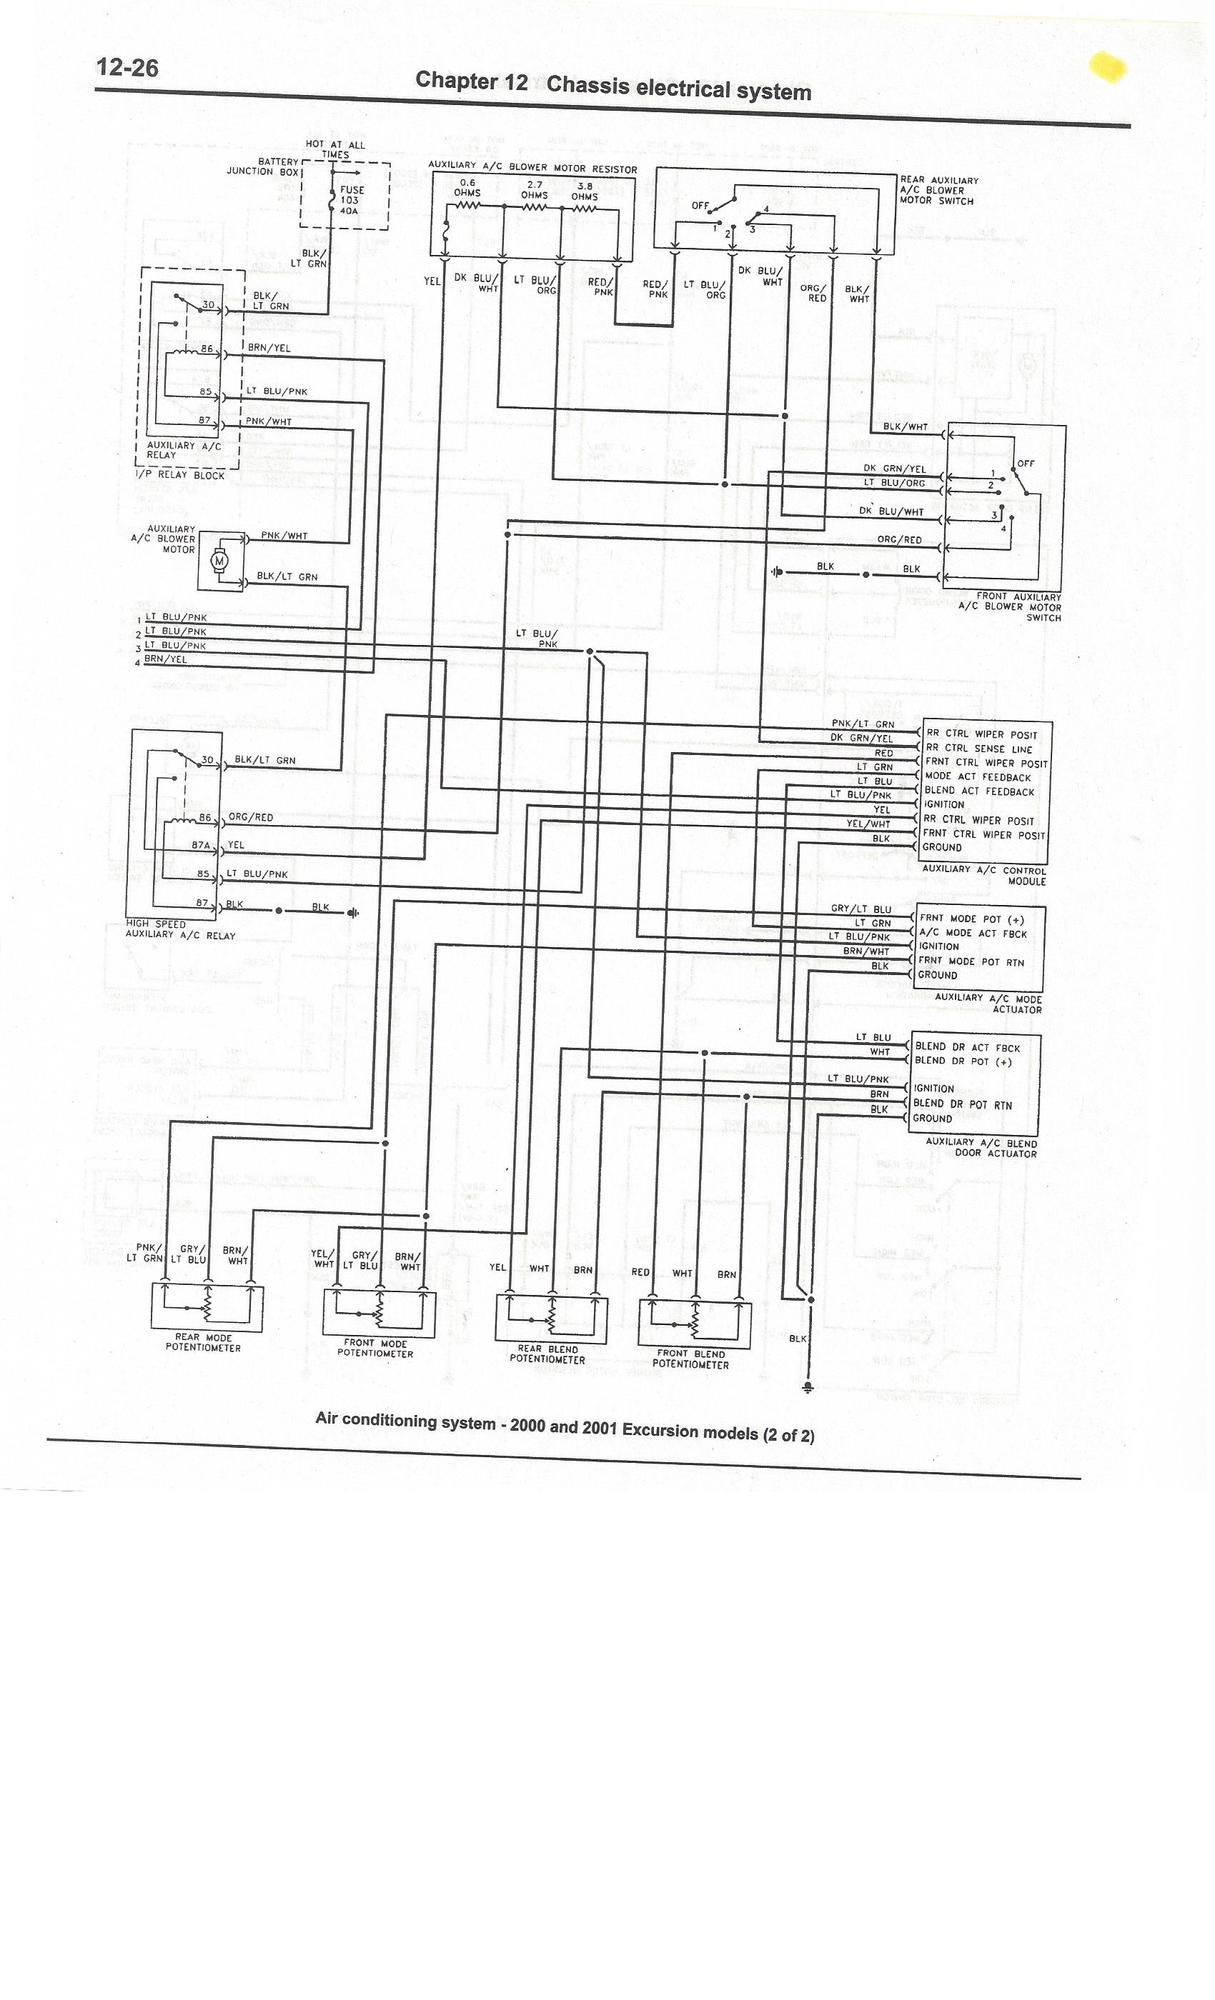 Complete Excursion Wiring Diagrams ... so far - Ford Truck Enthusiasts  Forums  2000 Excursion Audio Wiring Diagram    Ford Truck Enthusiasts